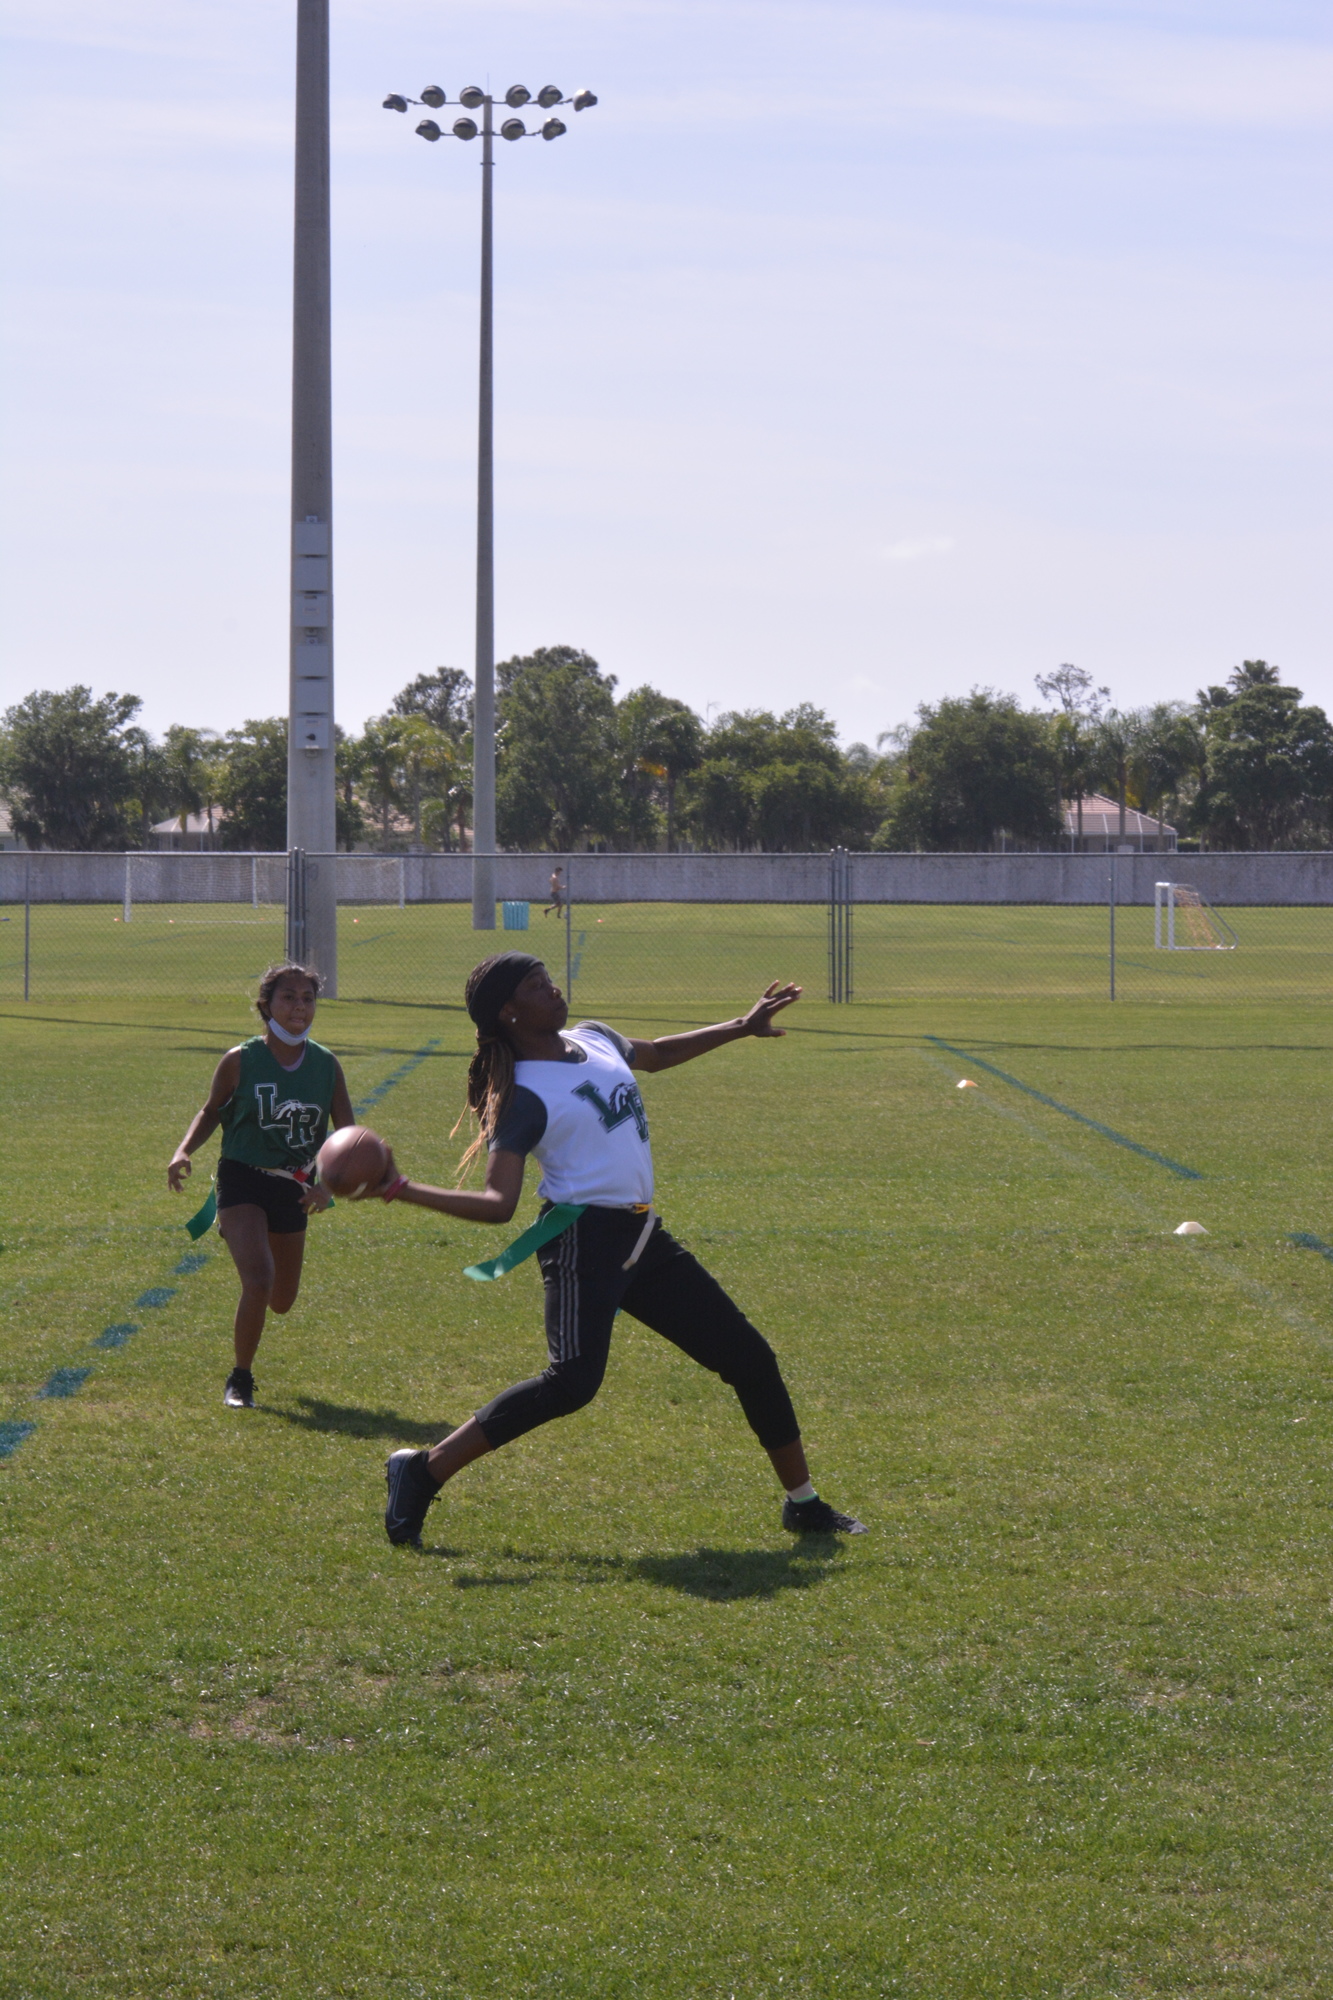 Kennedi Duncan launches a pass downfield while being pressured.